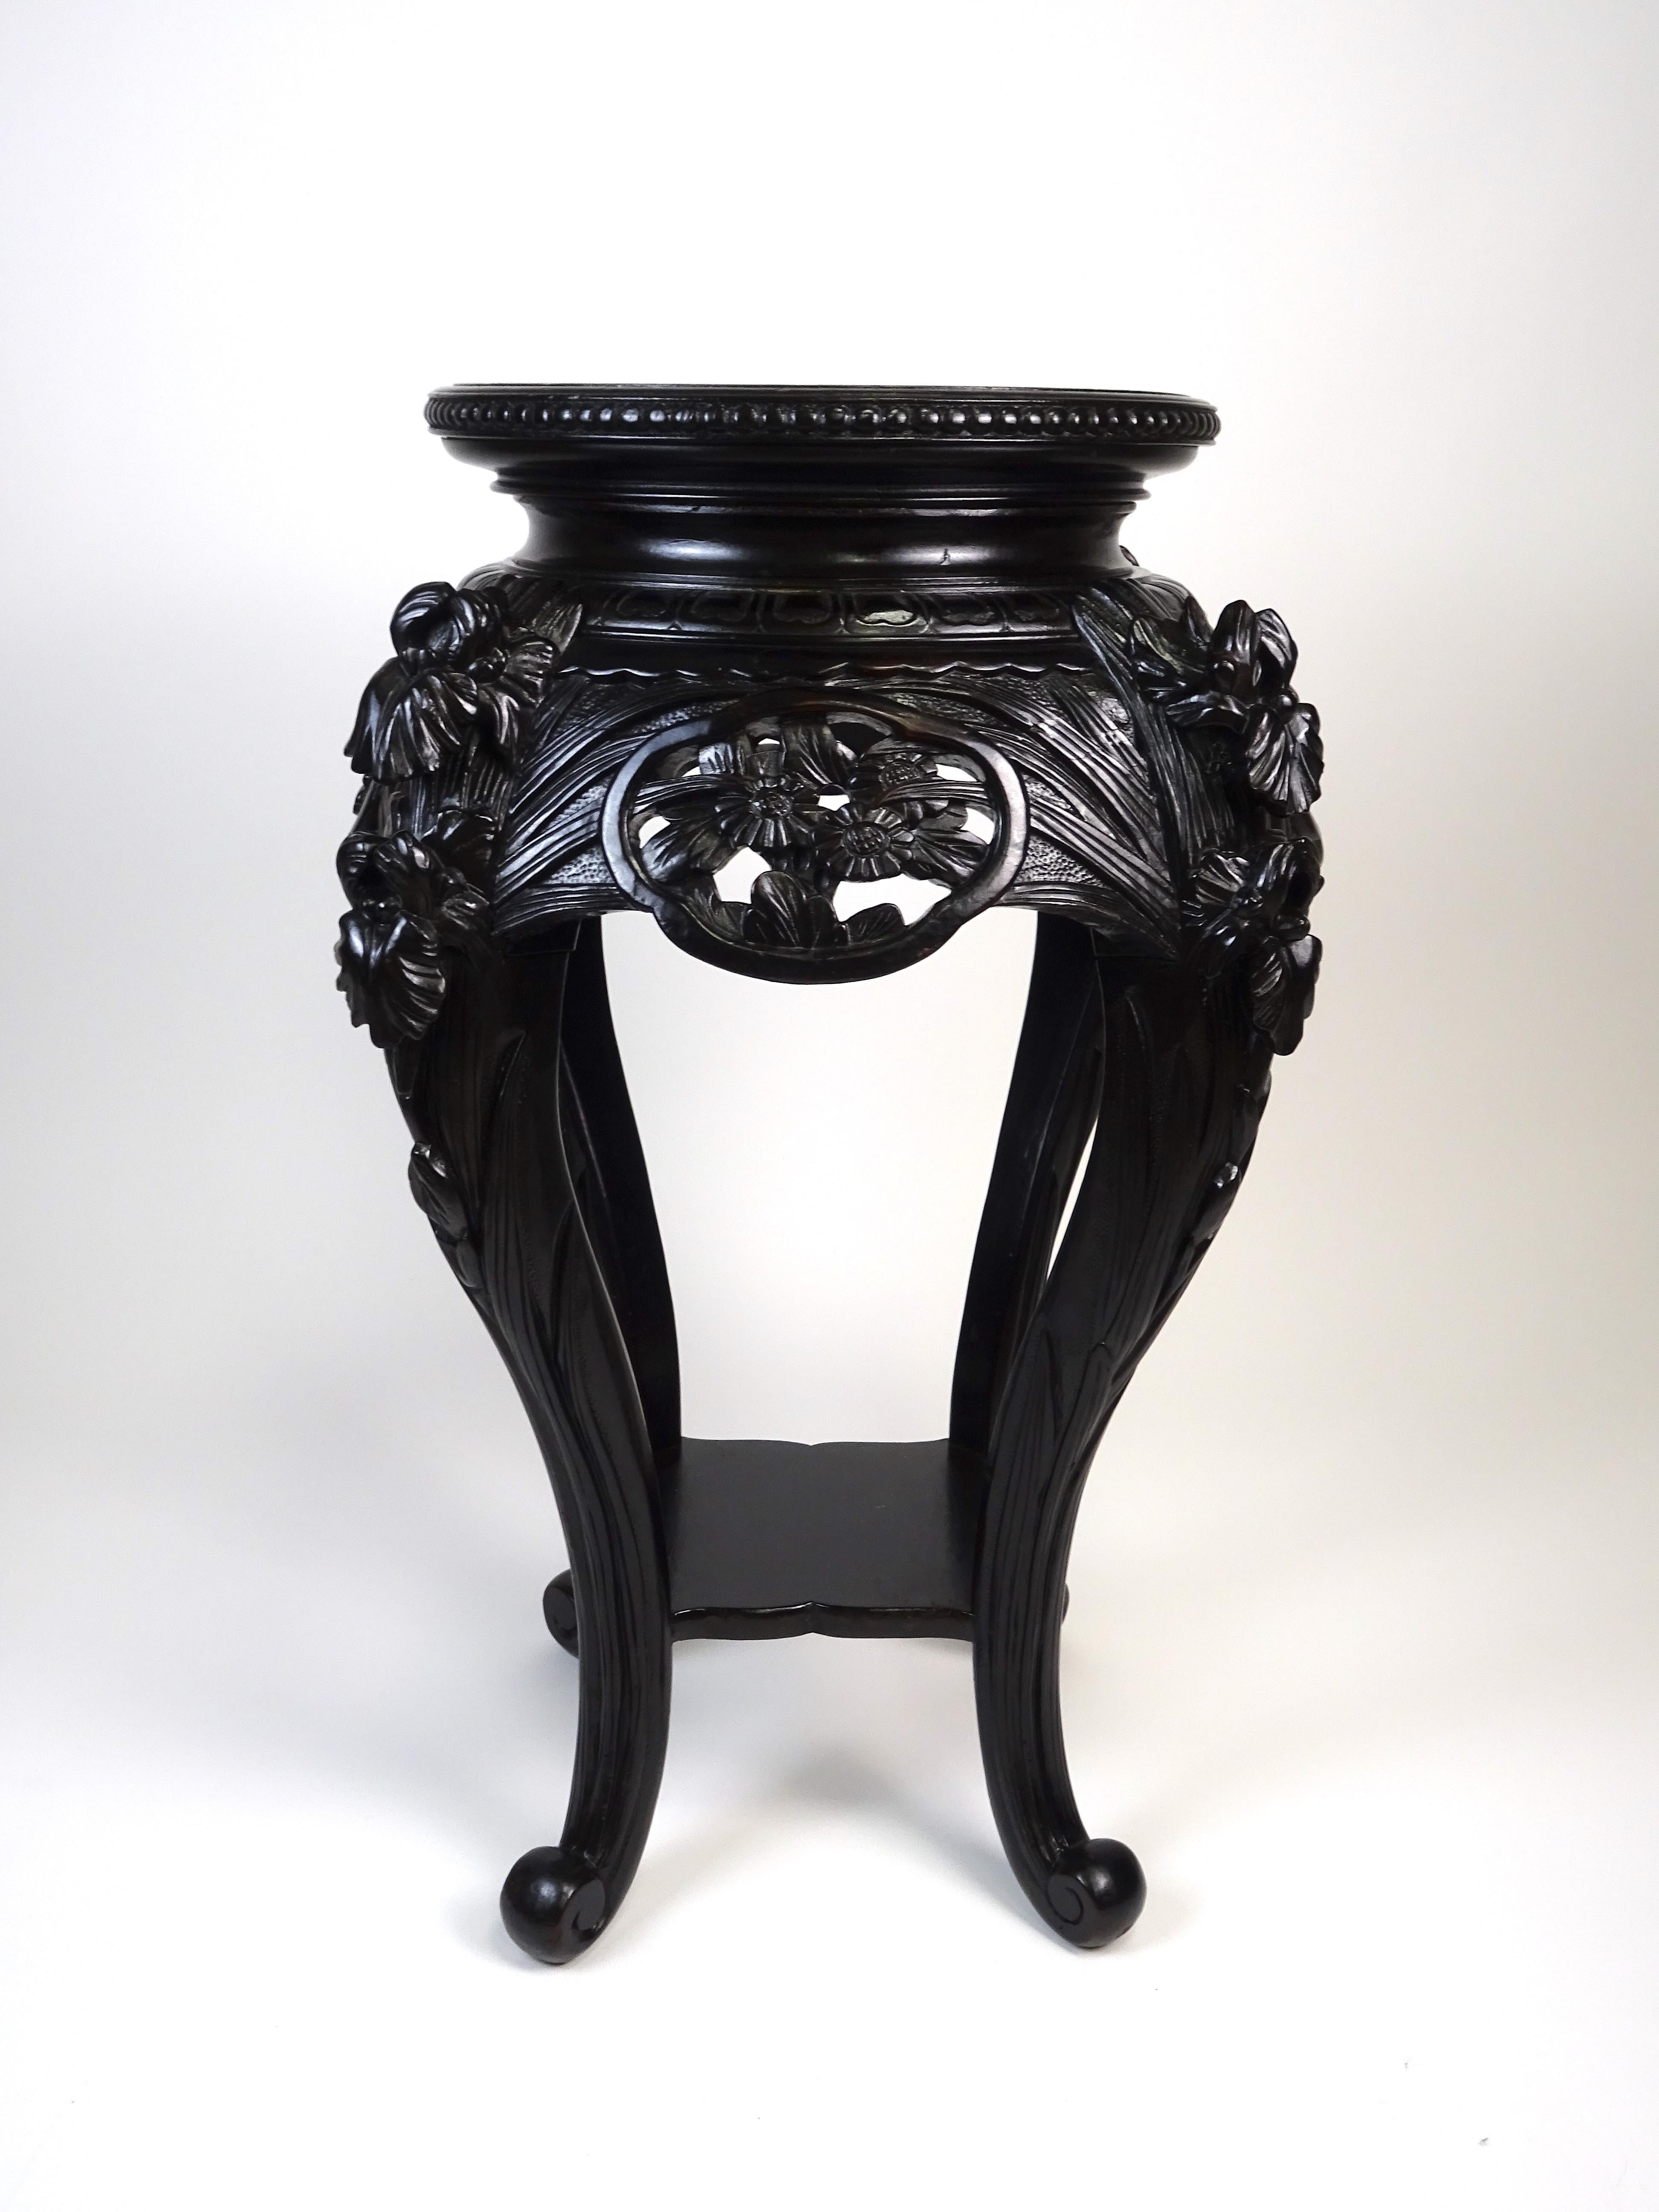 Pair of Chinese-made pedestals/pot stands, datable to the early 20th century.

The two pieces of furniture are made of carved ebonized oak, and are thus presented in a deep black color. There are geometric patterns on the circular top, while floral